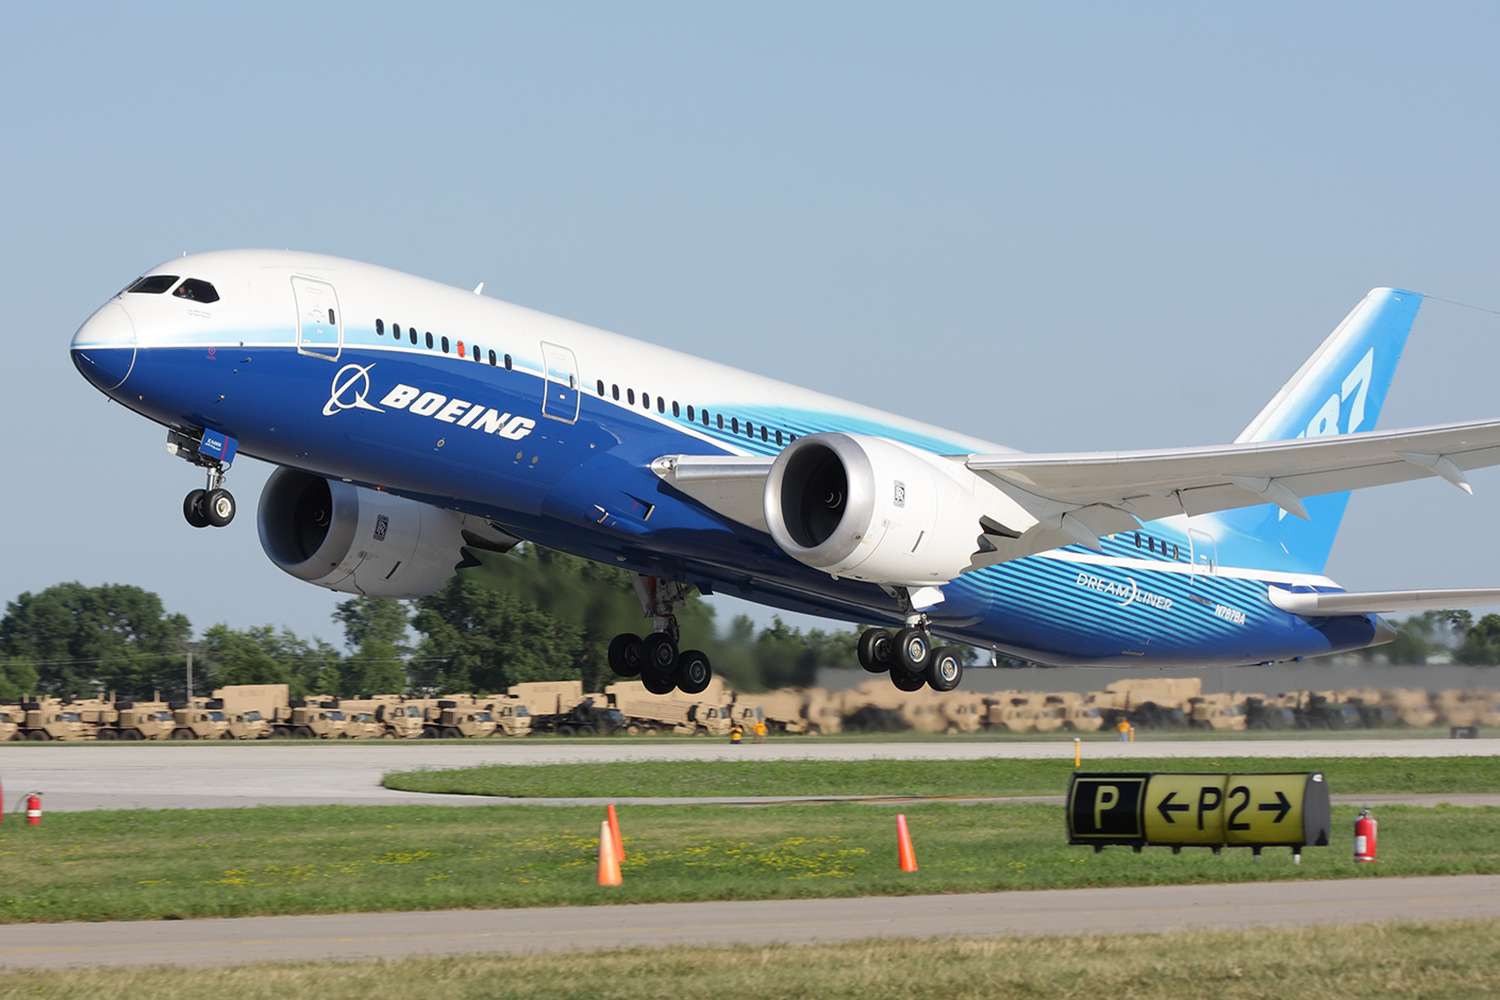 boeing whistleblower reportedly claims 787 planes could break apart mid-air due to construction flaws